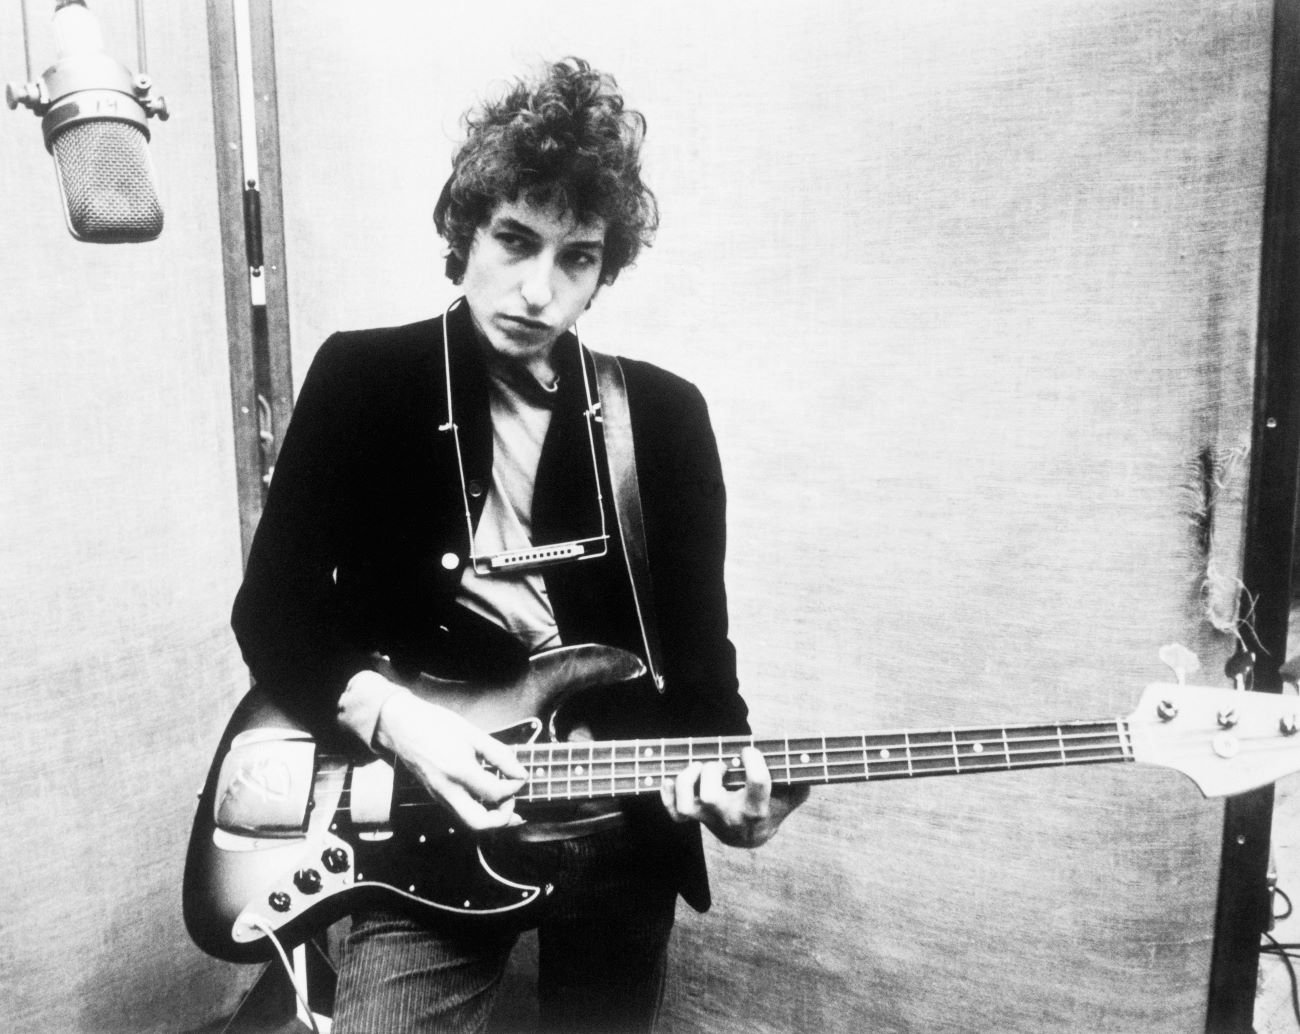 Bob Dylan’s Friend Refused to Write About the Musician’s Private Life in a Book 